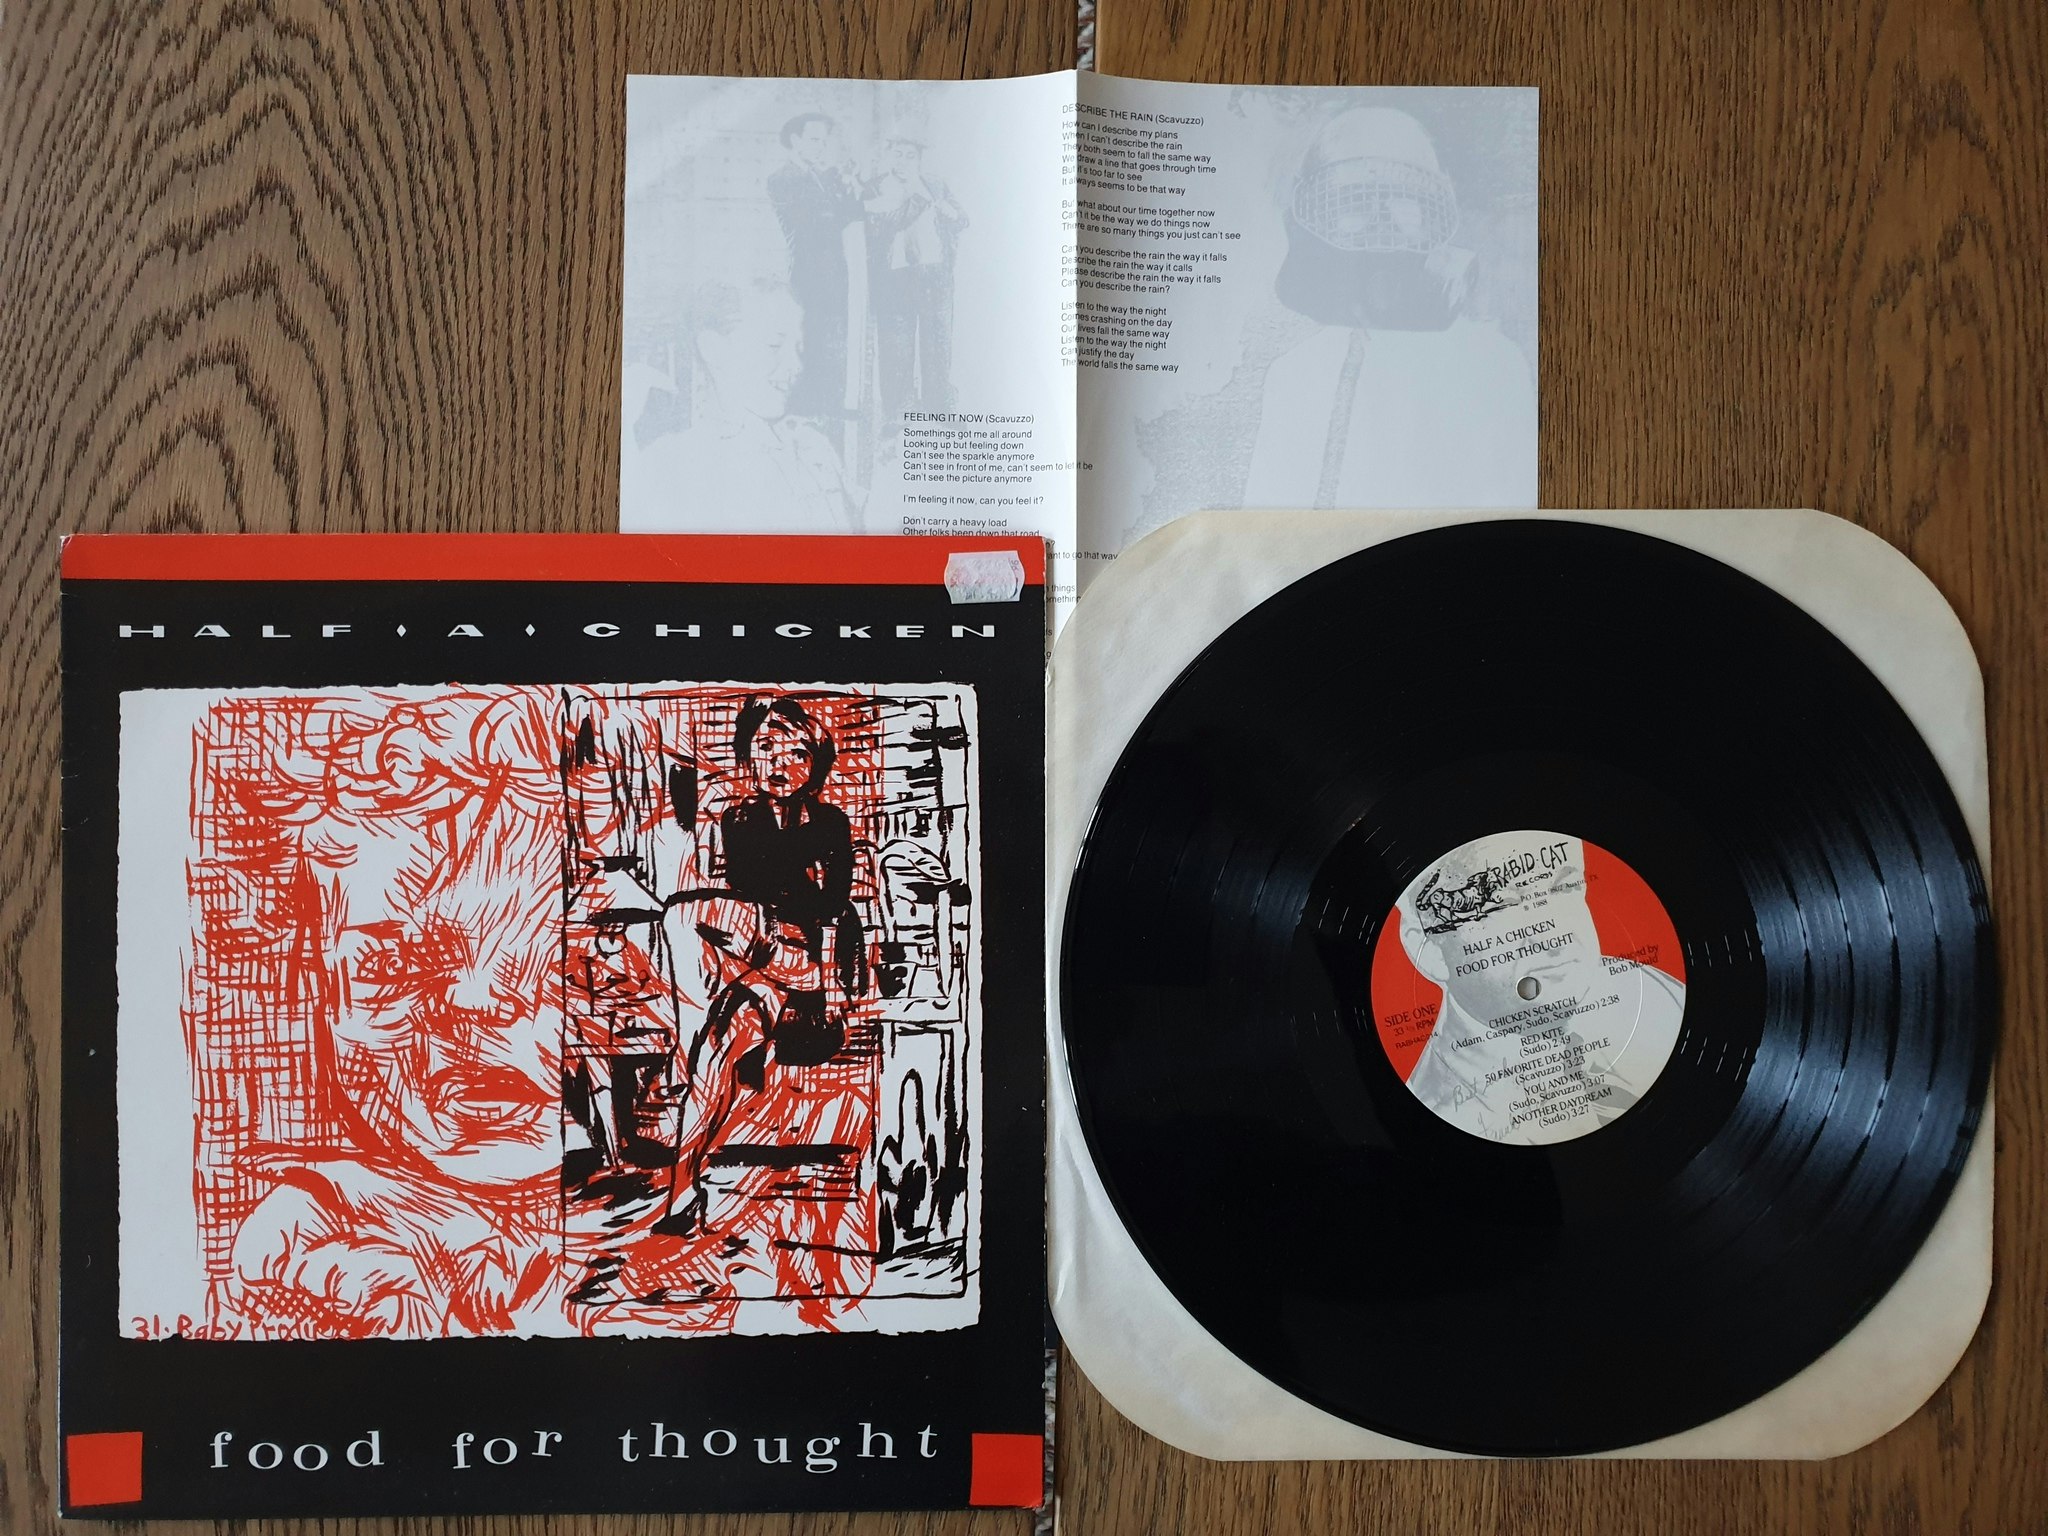 Half a chicken, Food for thought. Vinyl LP